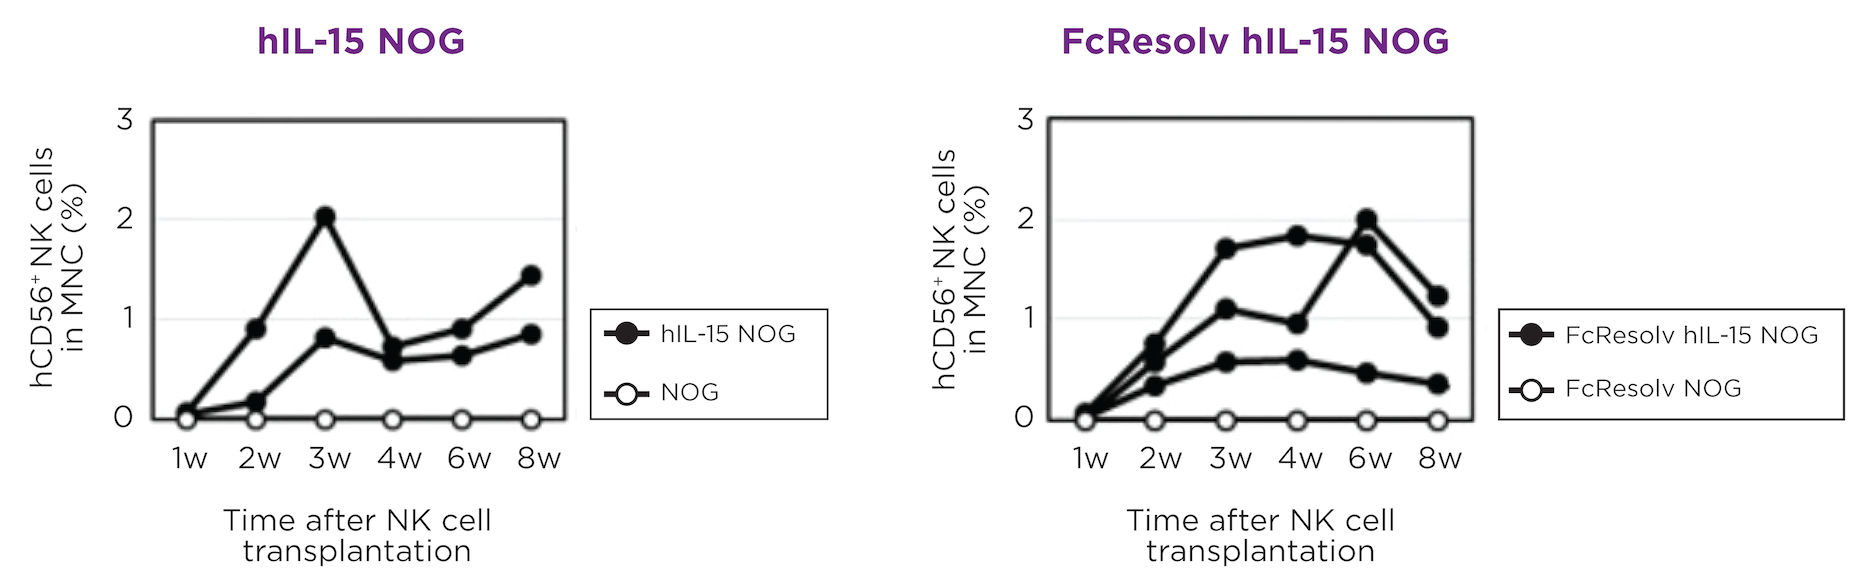 hIL-15 NOG mice support the engraftment of expanded human NK cells with engraftment levels and persistence similar to the base hIL-15 NOG mouse.